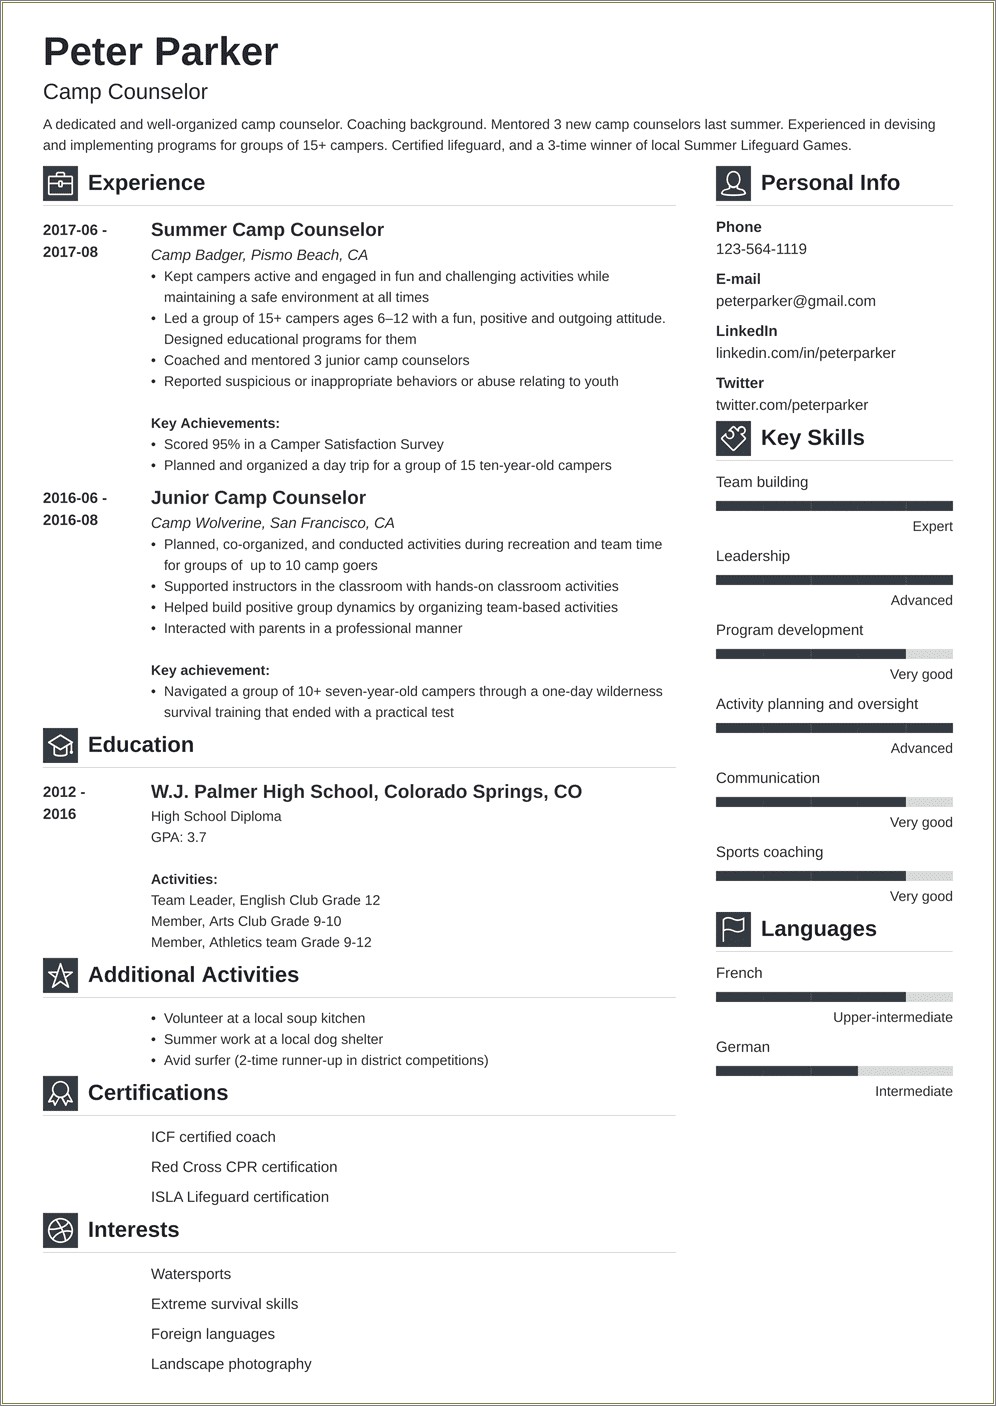 Resume Objective Applying For Summer Camp Position